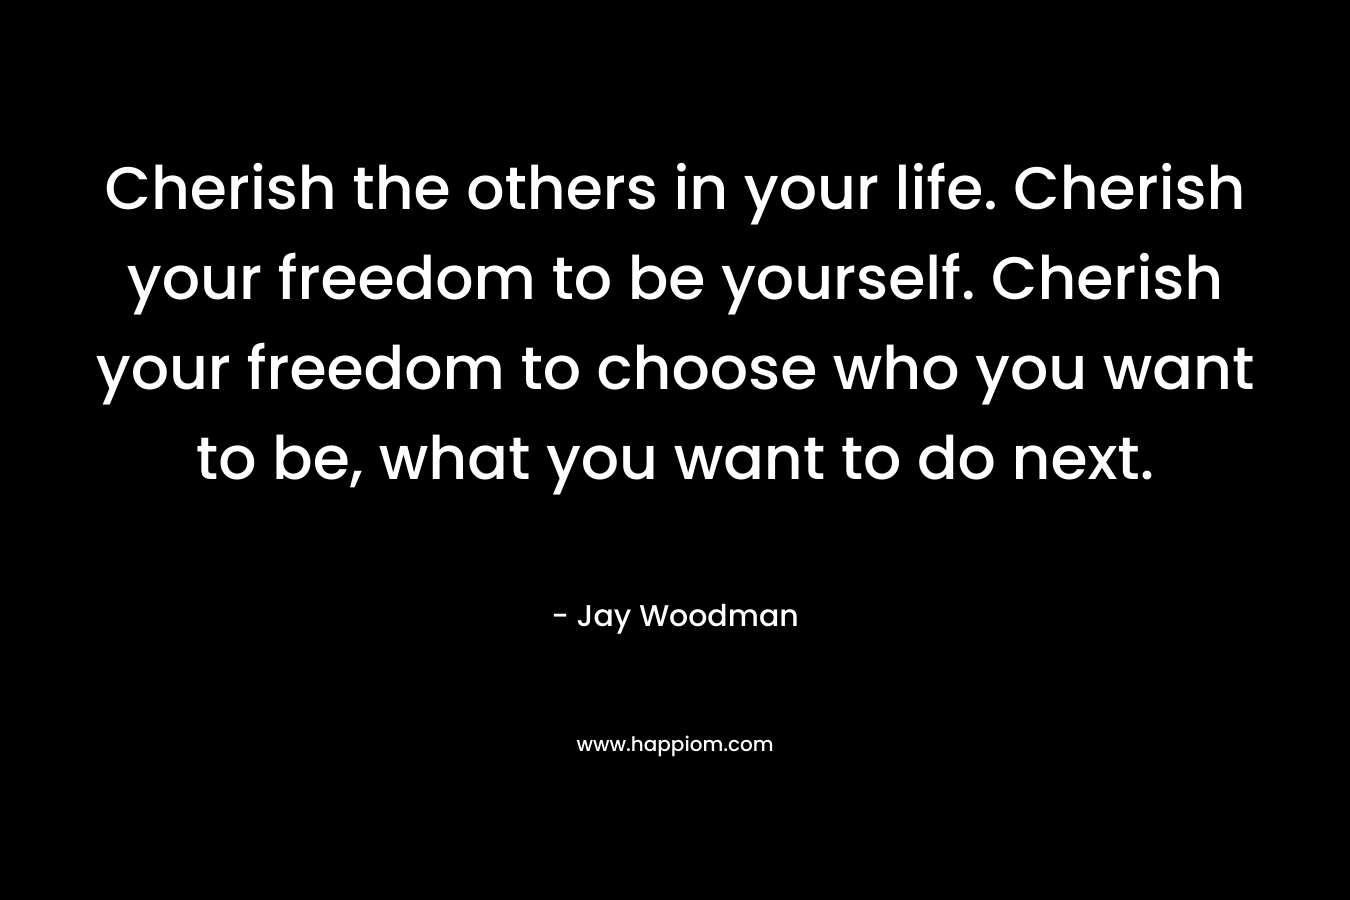 Cherish the others in your life. Cherish your freedom to be yourself. Cherish your freedom to choose who you want to be, what you want to do next.